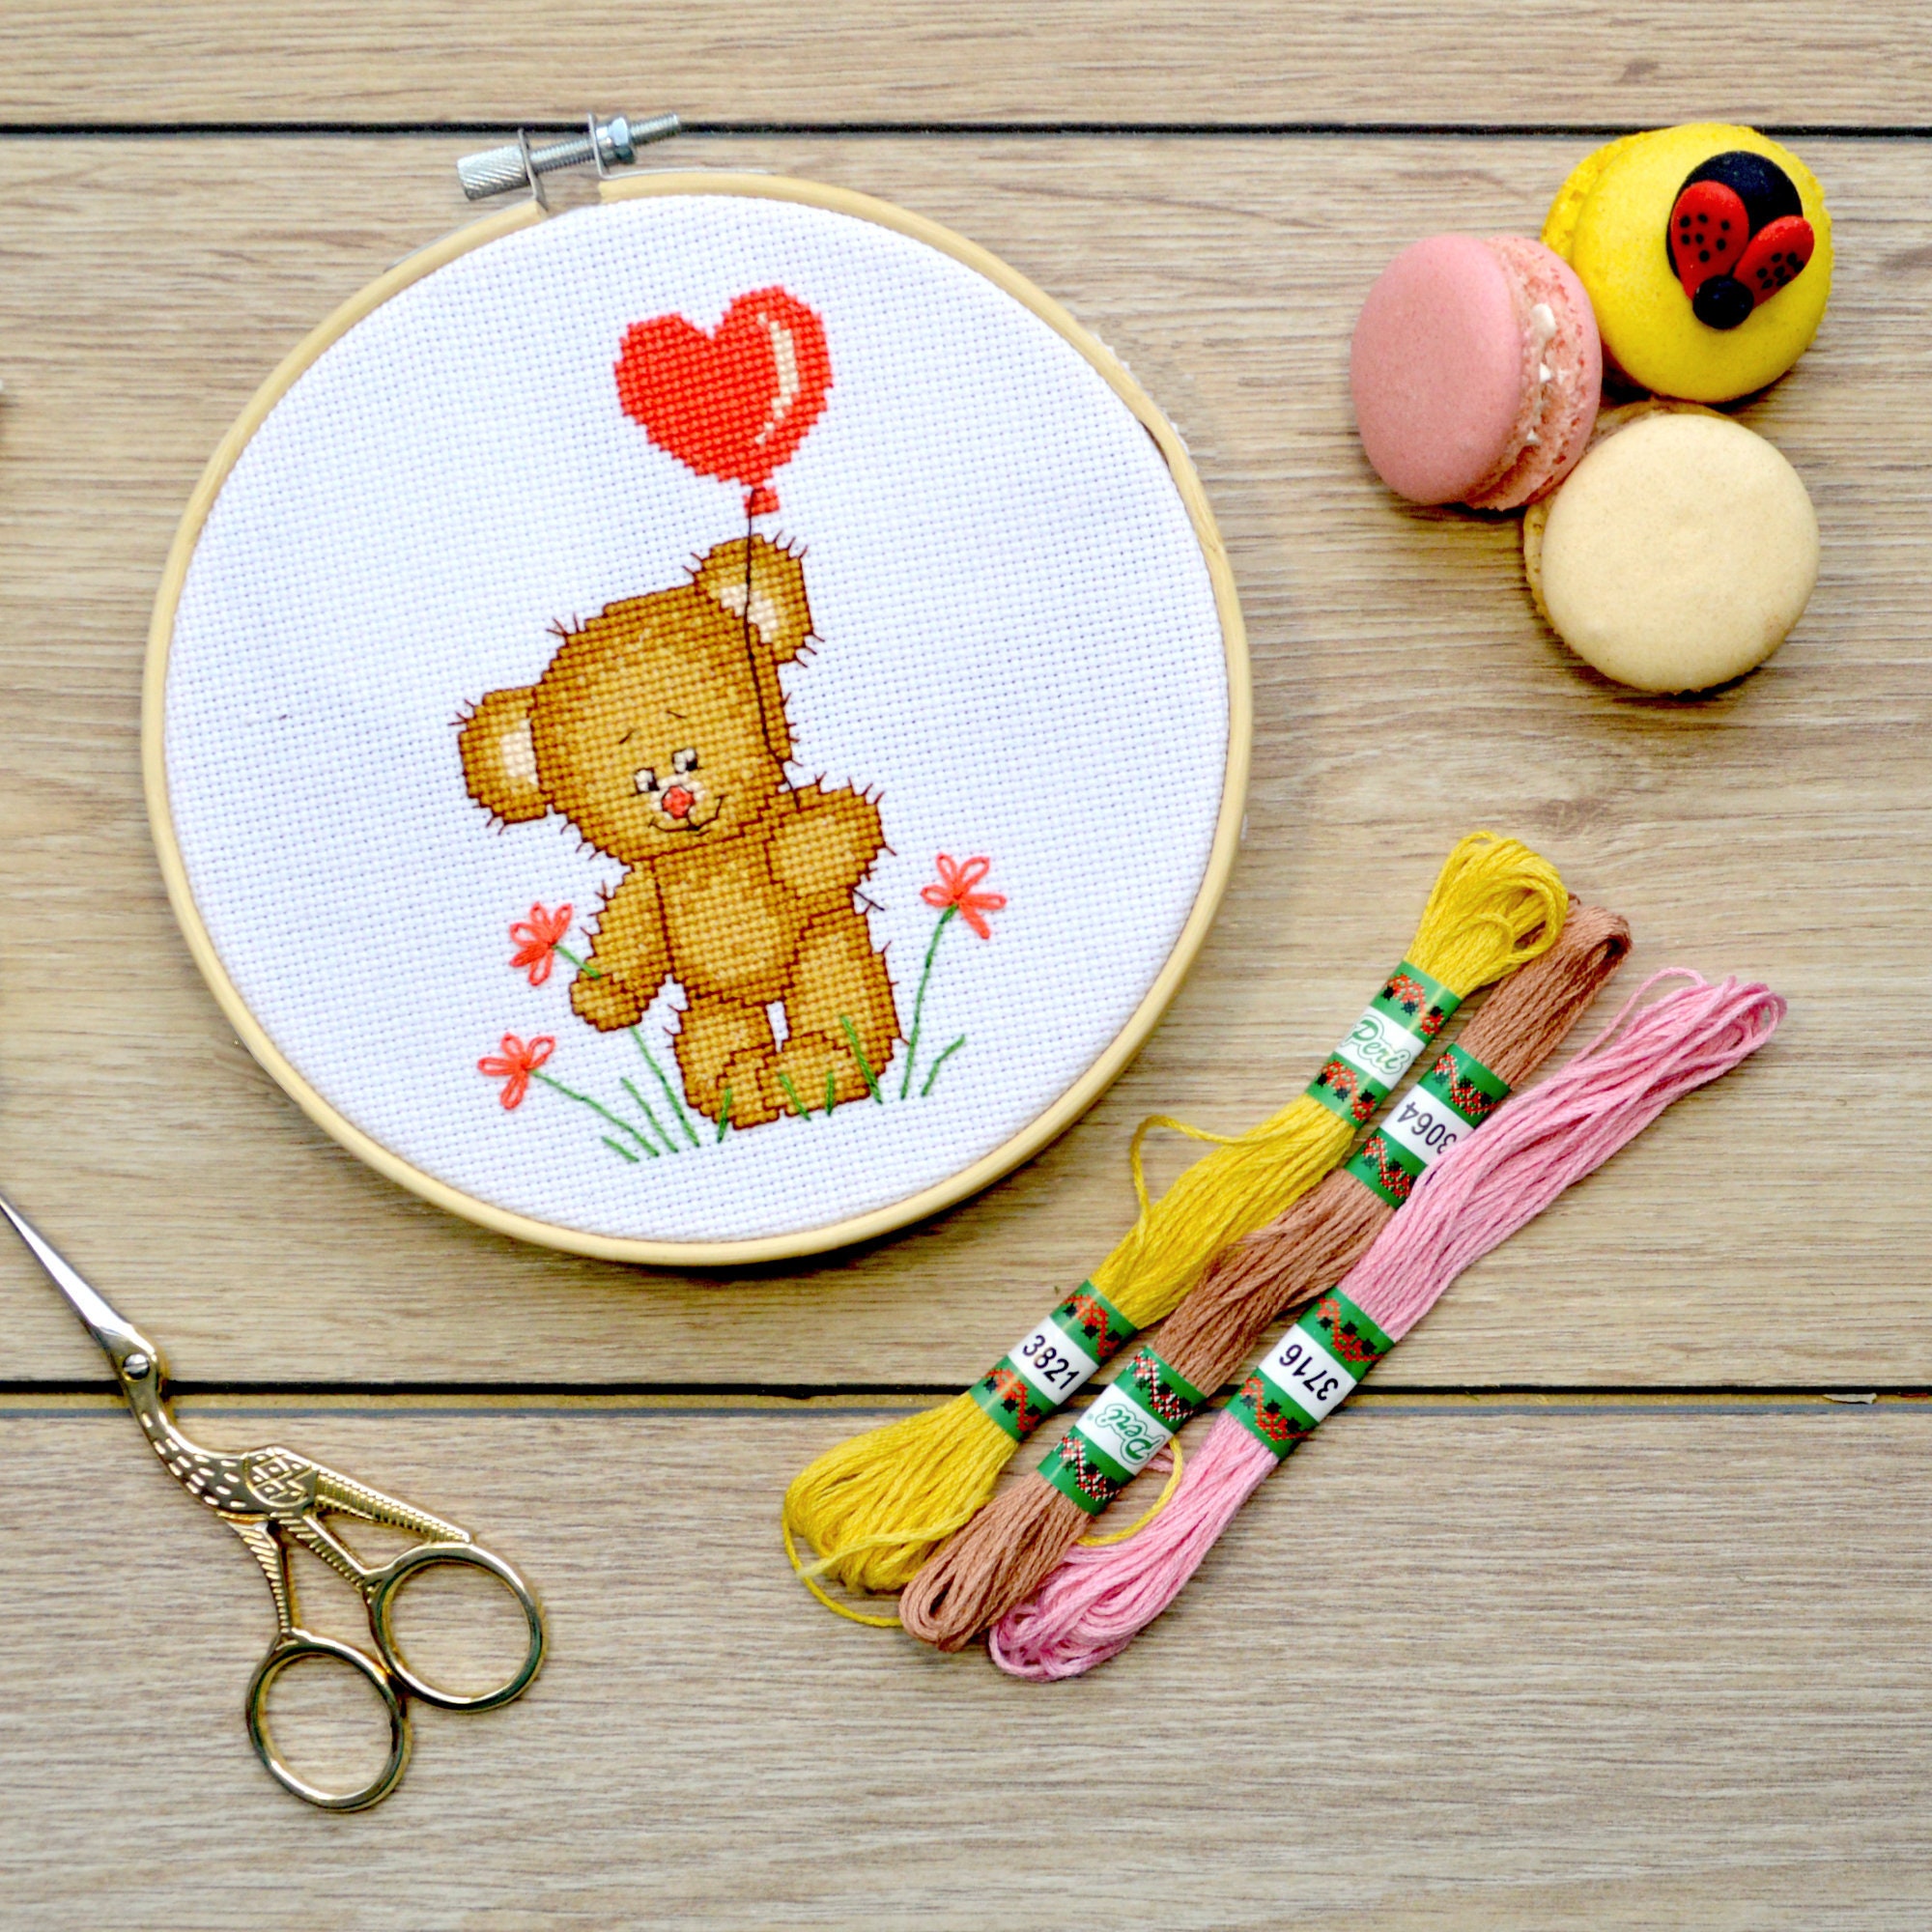 teddy-bear-cross-stitch-counted-pattern-for-beginners-etsy